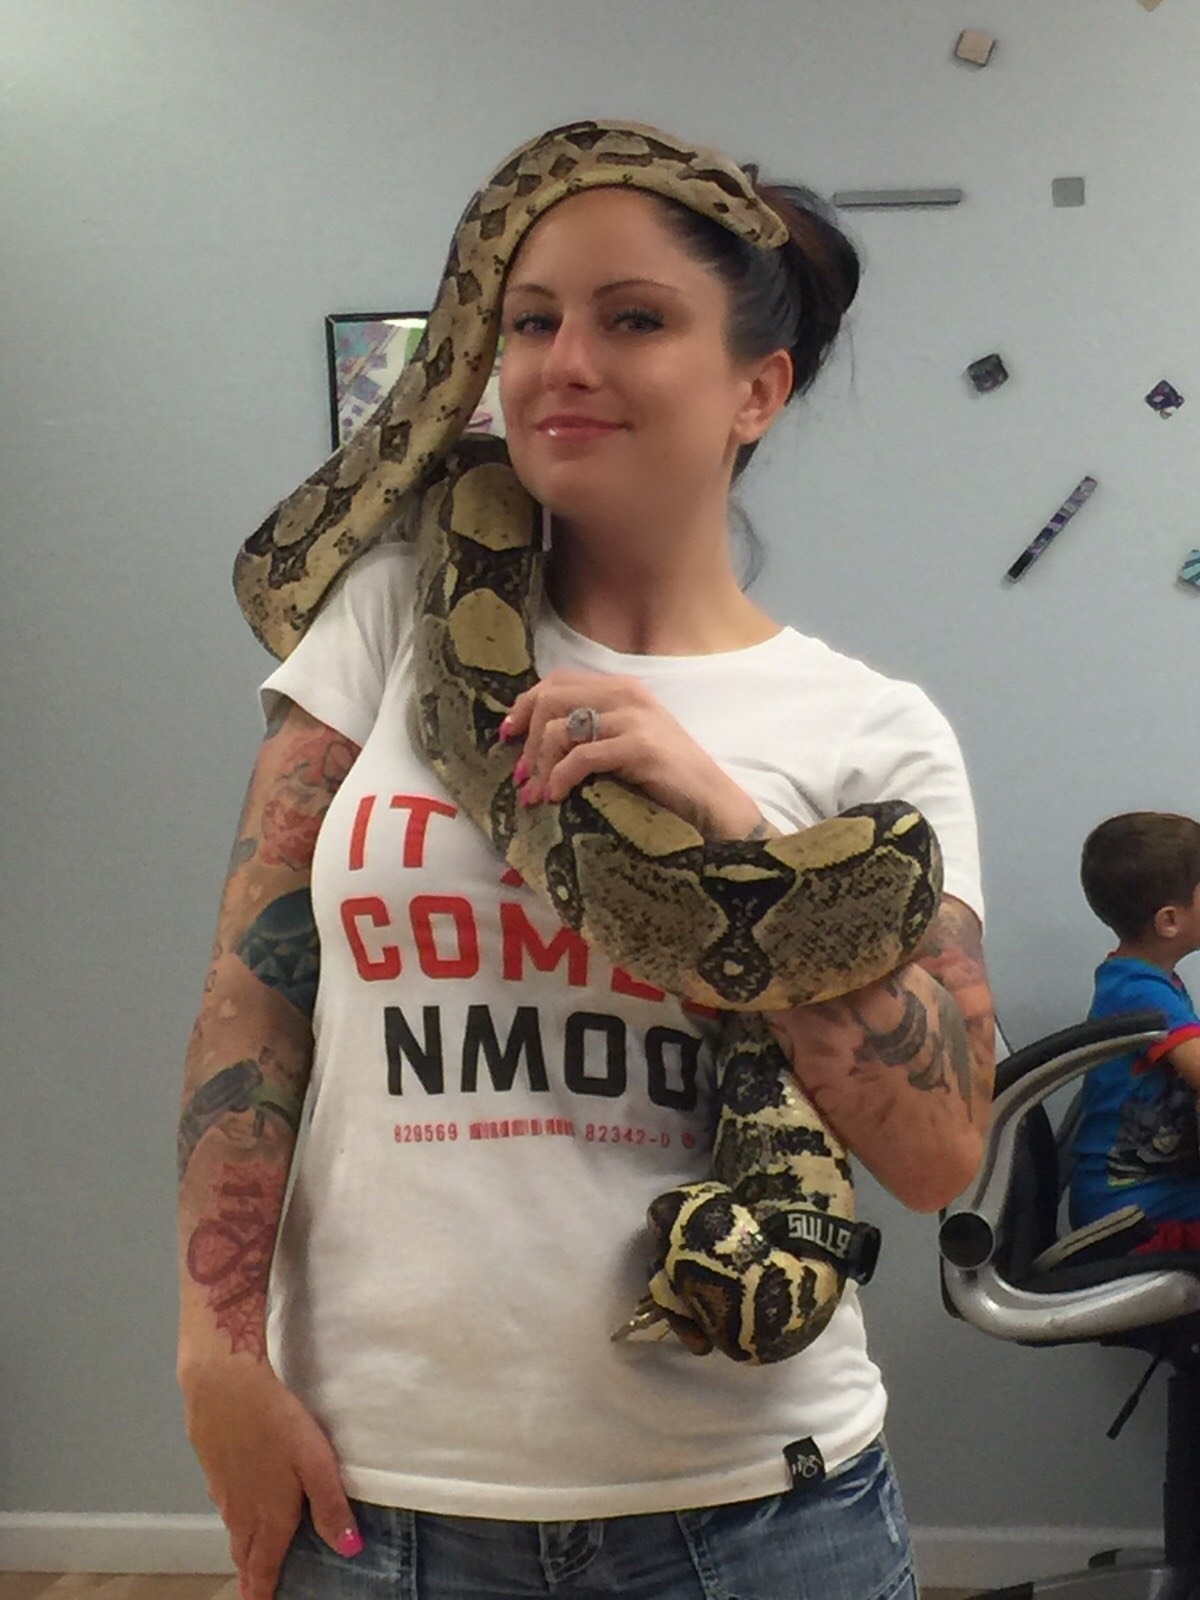 pet boa constrictor sizes up owner